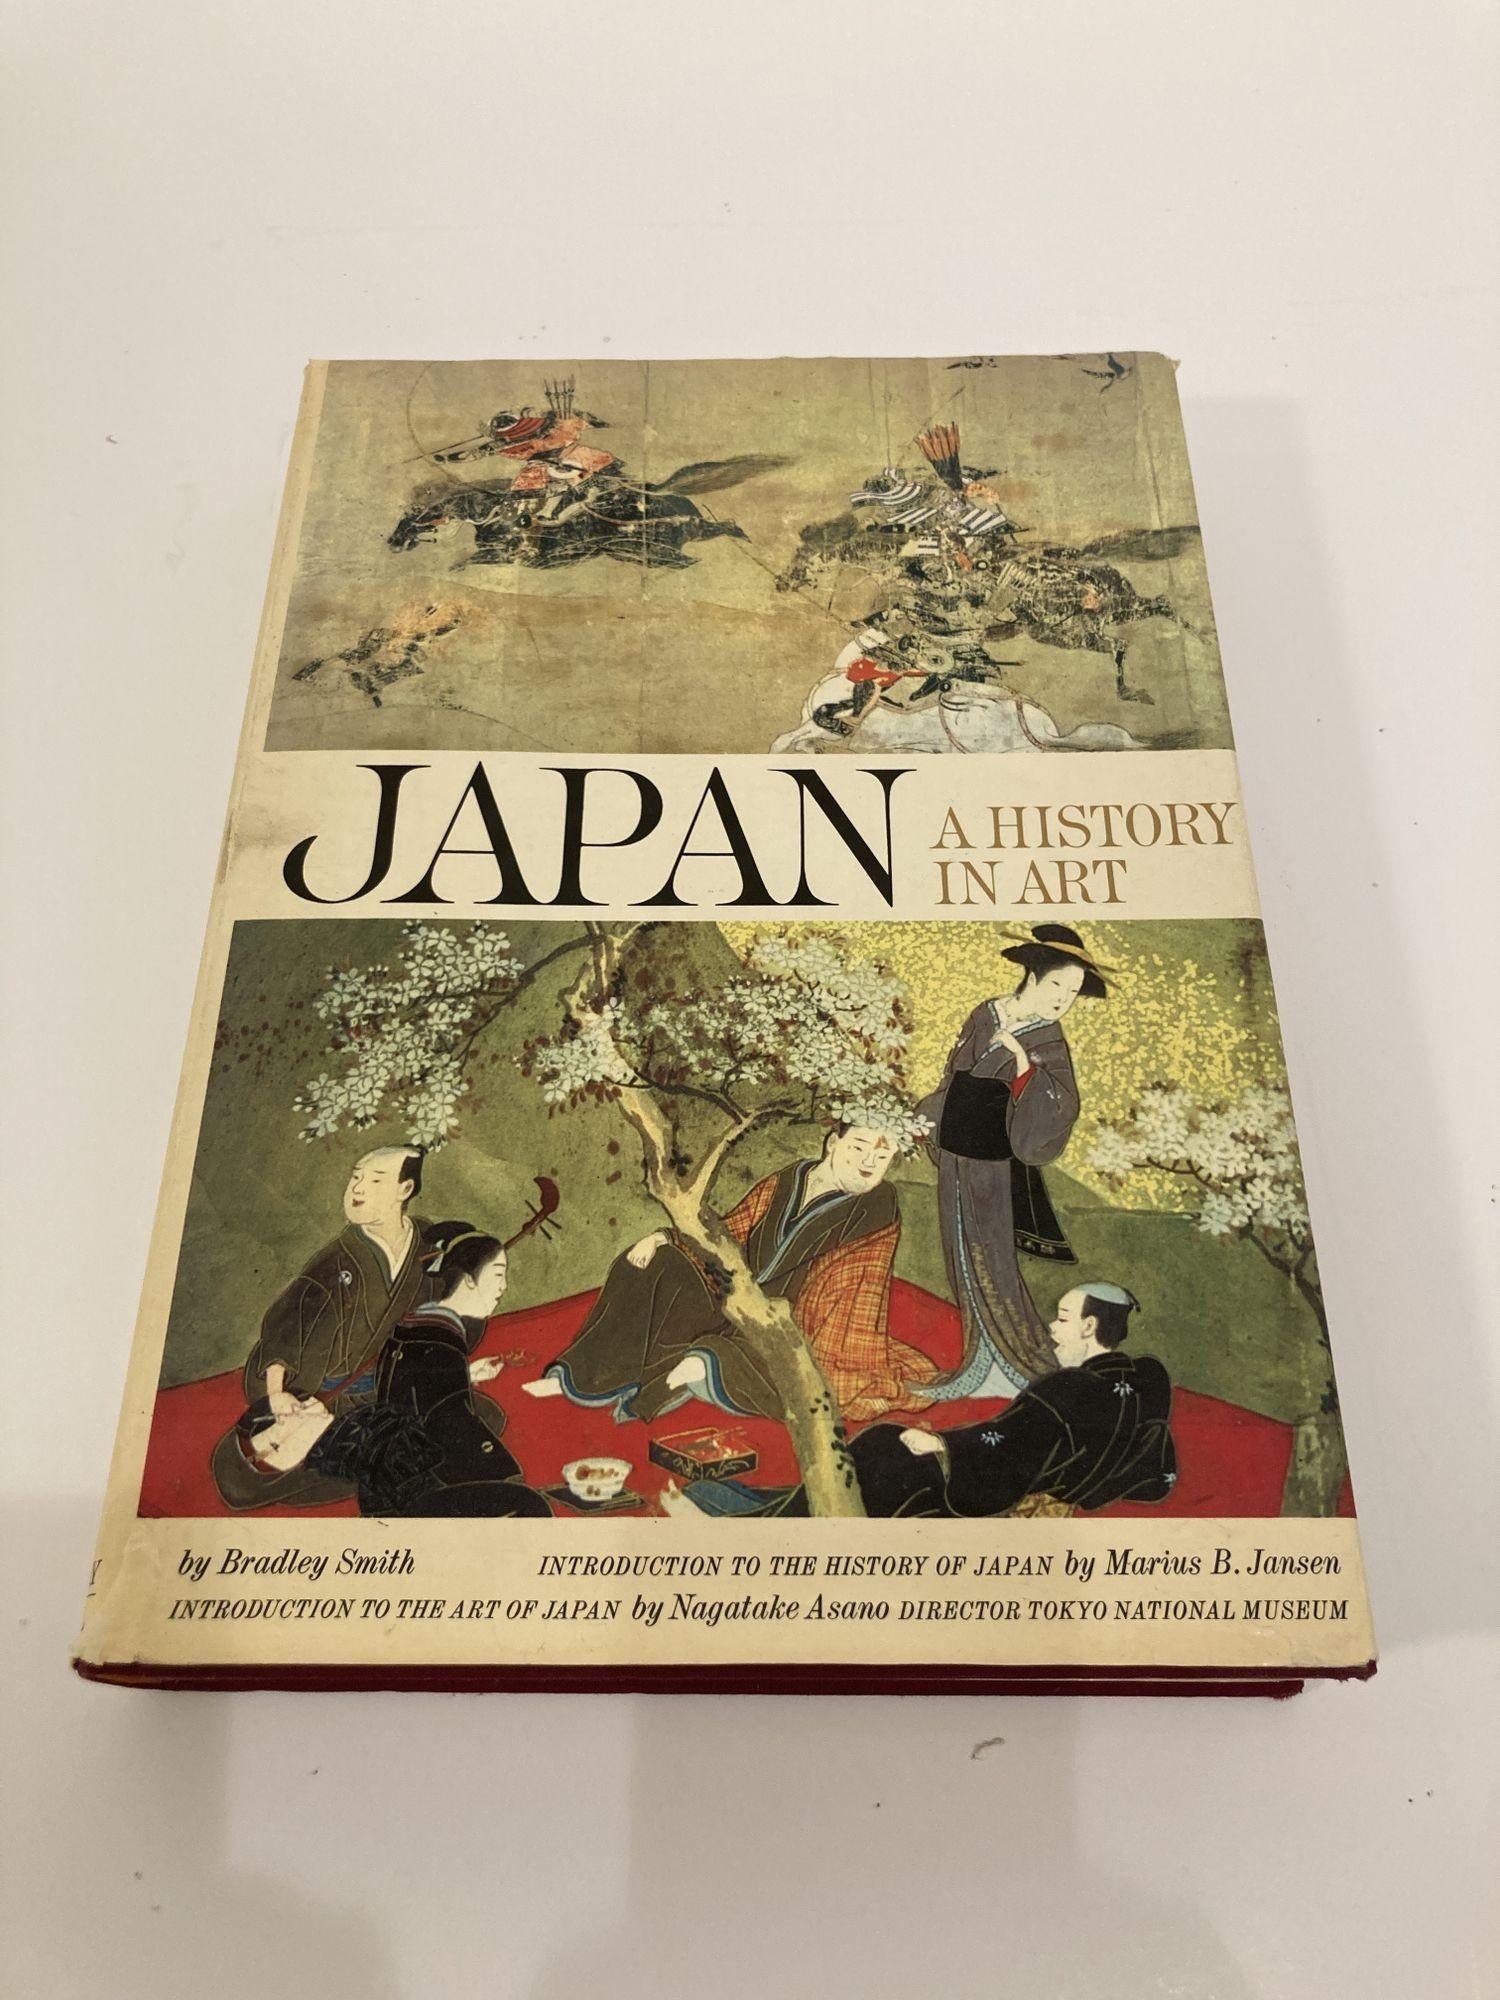 Japan; a history in art Book by Bradley Smith.
Bradley Smith, Robert Kimmel Smith Simon and Schuster,
Travel - 295 pages

1st edition 1st printing 1964.
Place Of Publication New York
Date Published 1964.
Binding Hardcover
Presents the